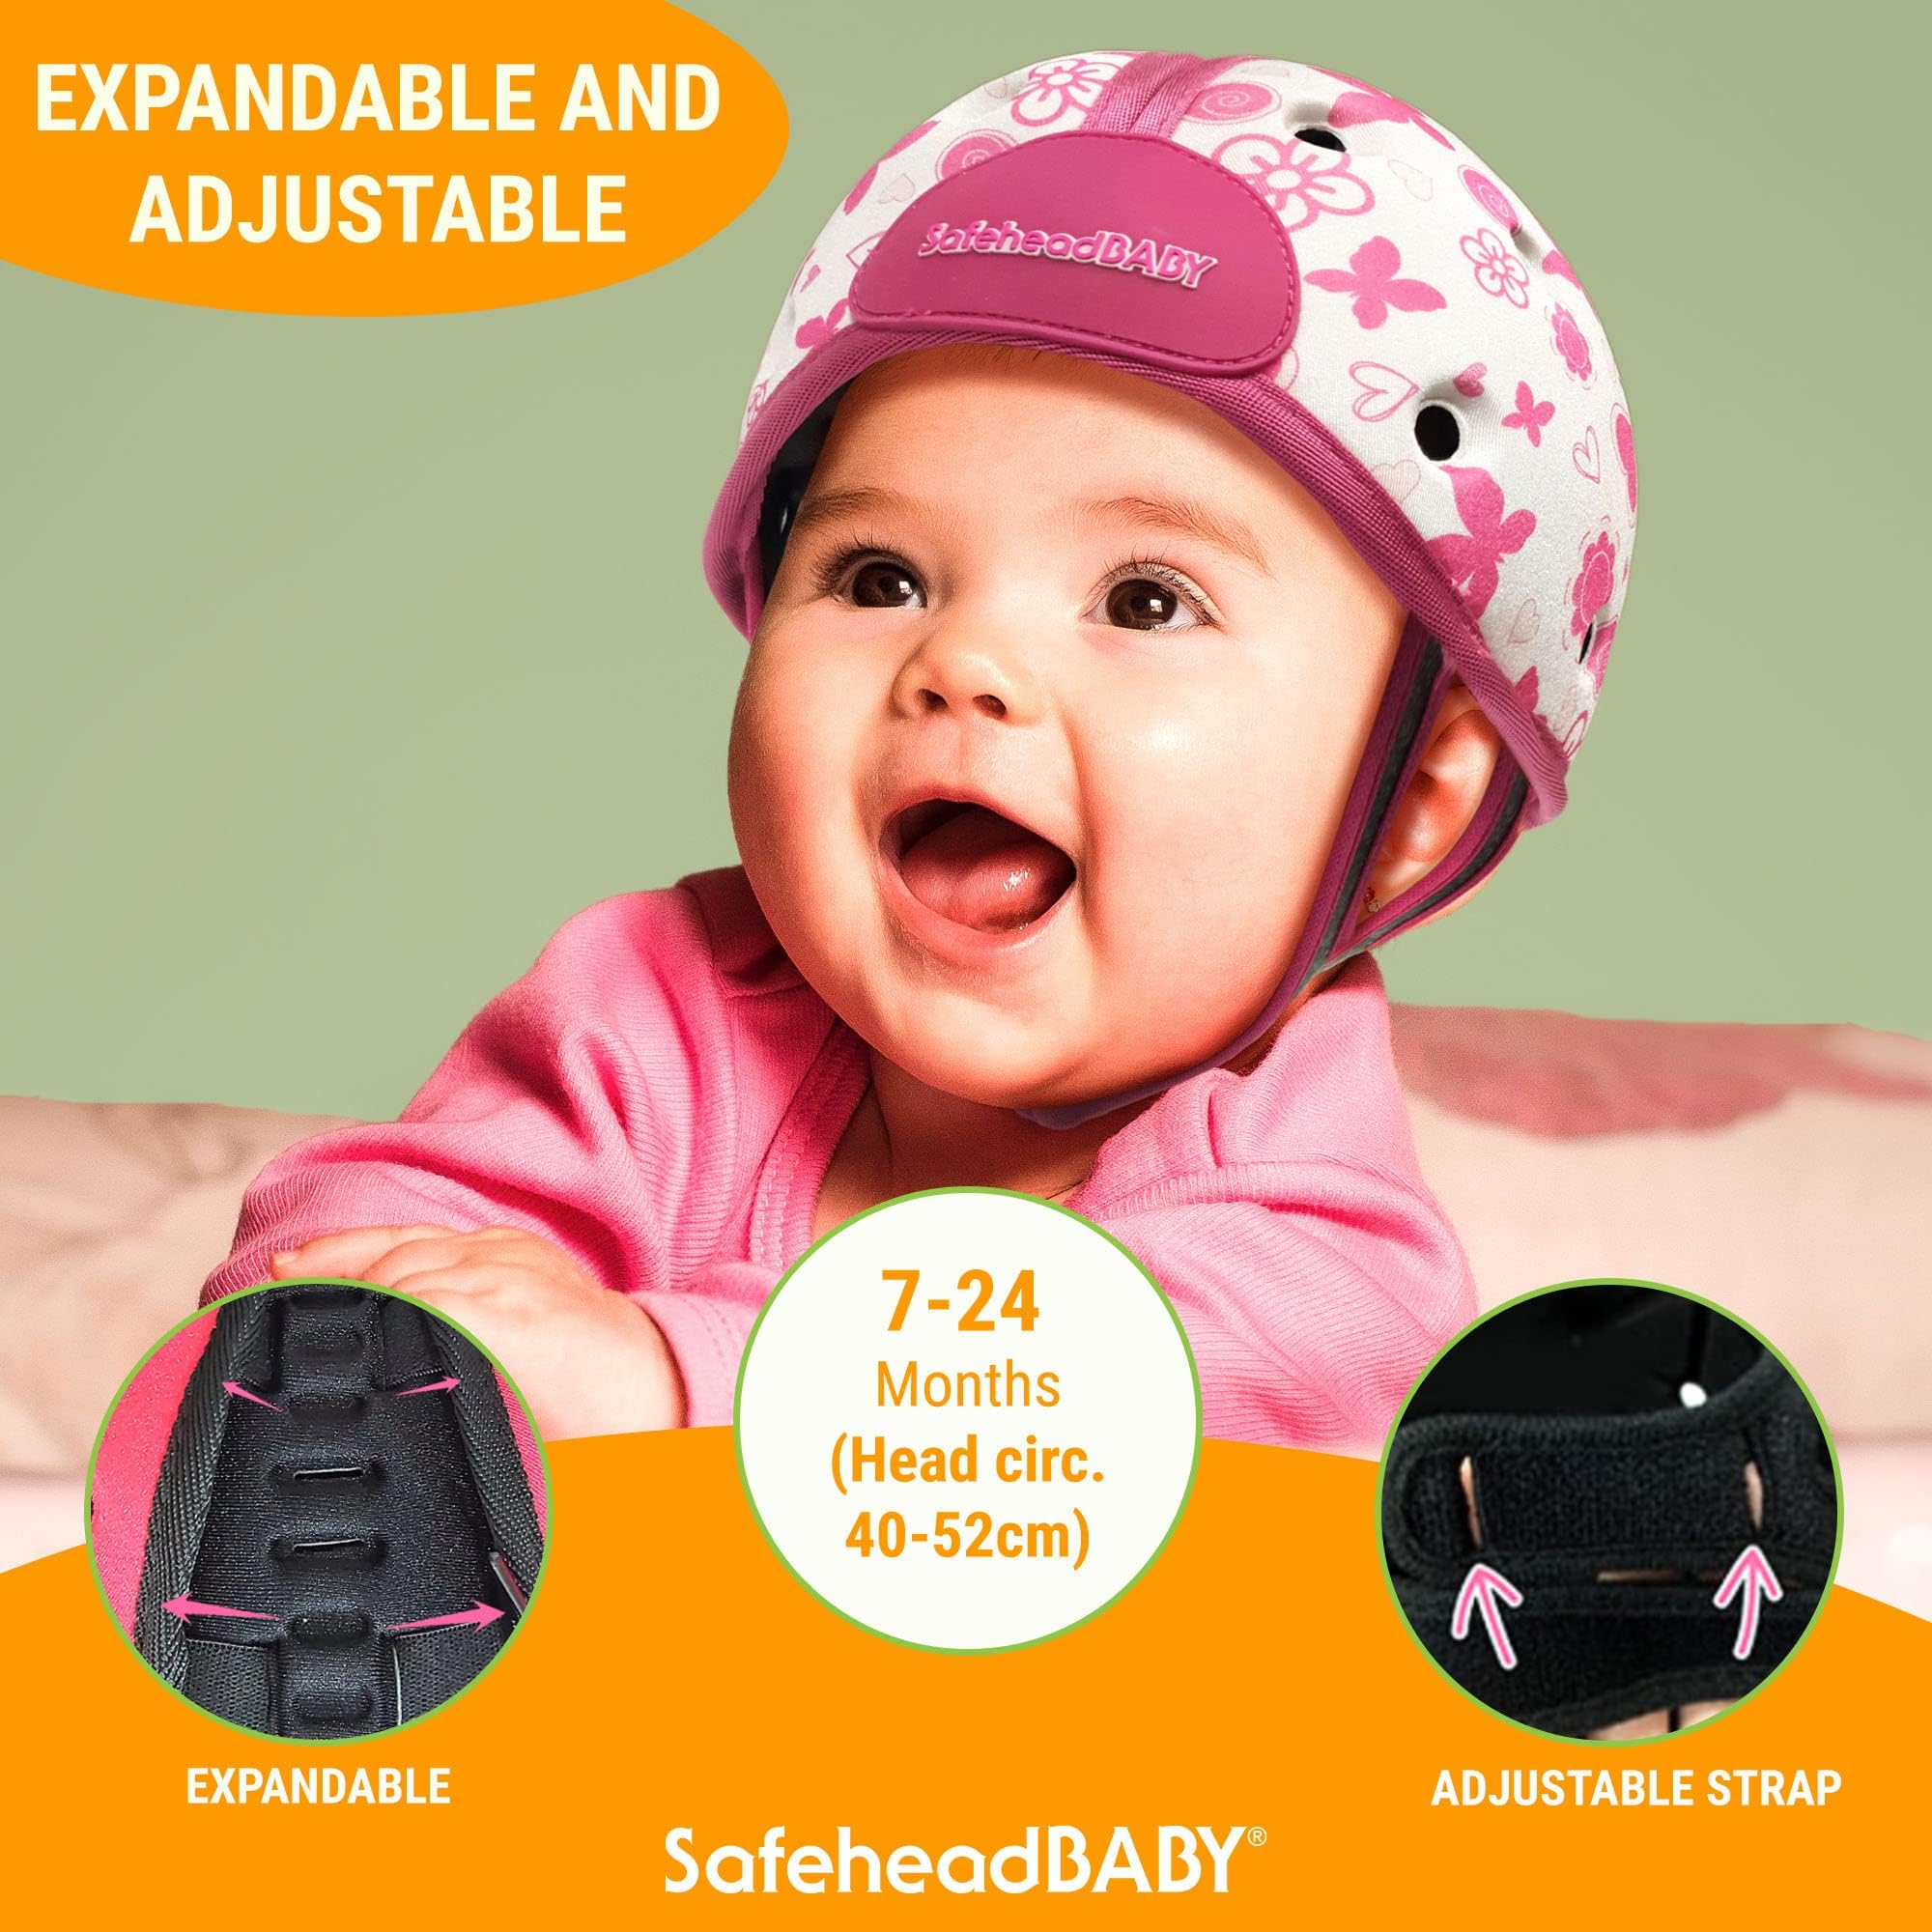 SafeheadBABY Award-Winning Infant Safety Helmet Baby Helmet for Crawling Walking Ultra-Lightweight Baby Head Protector Expandable and Breathable Toddler Head Protection Helmets